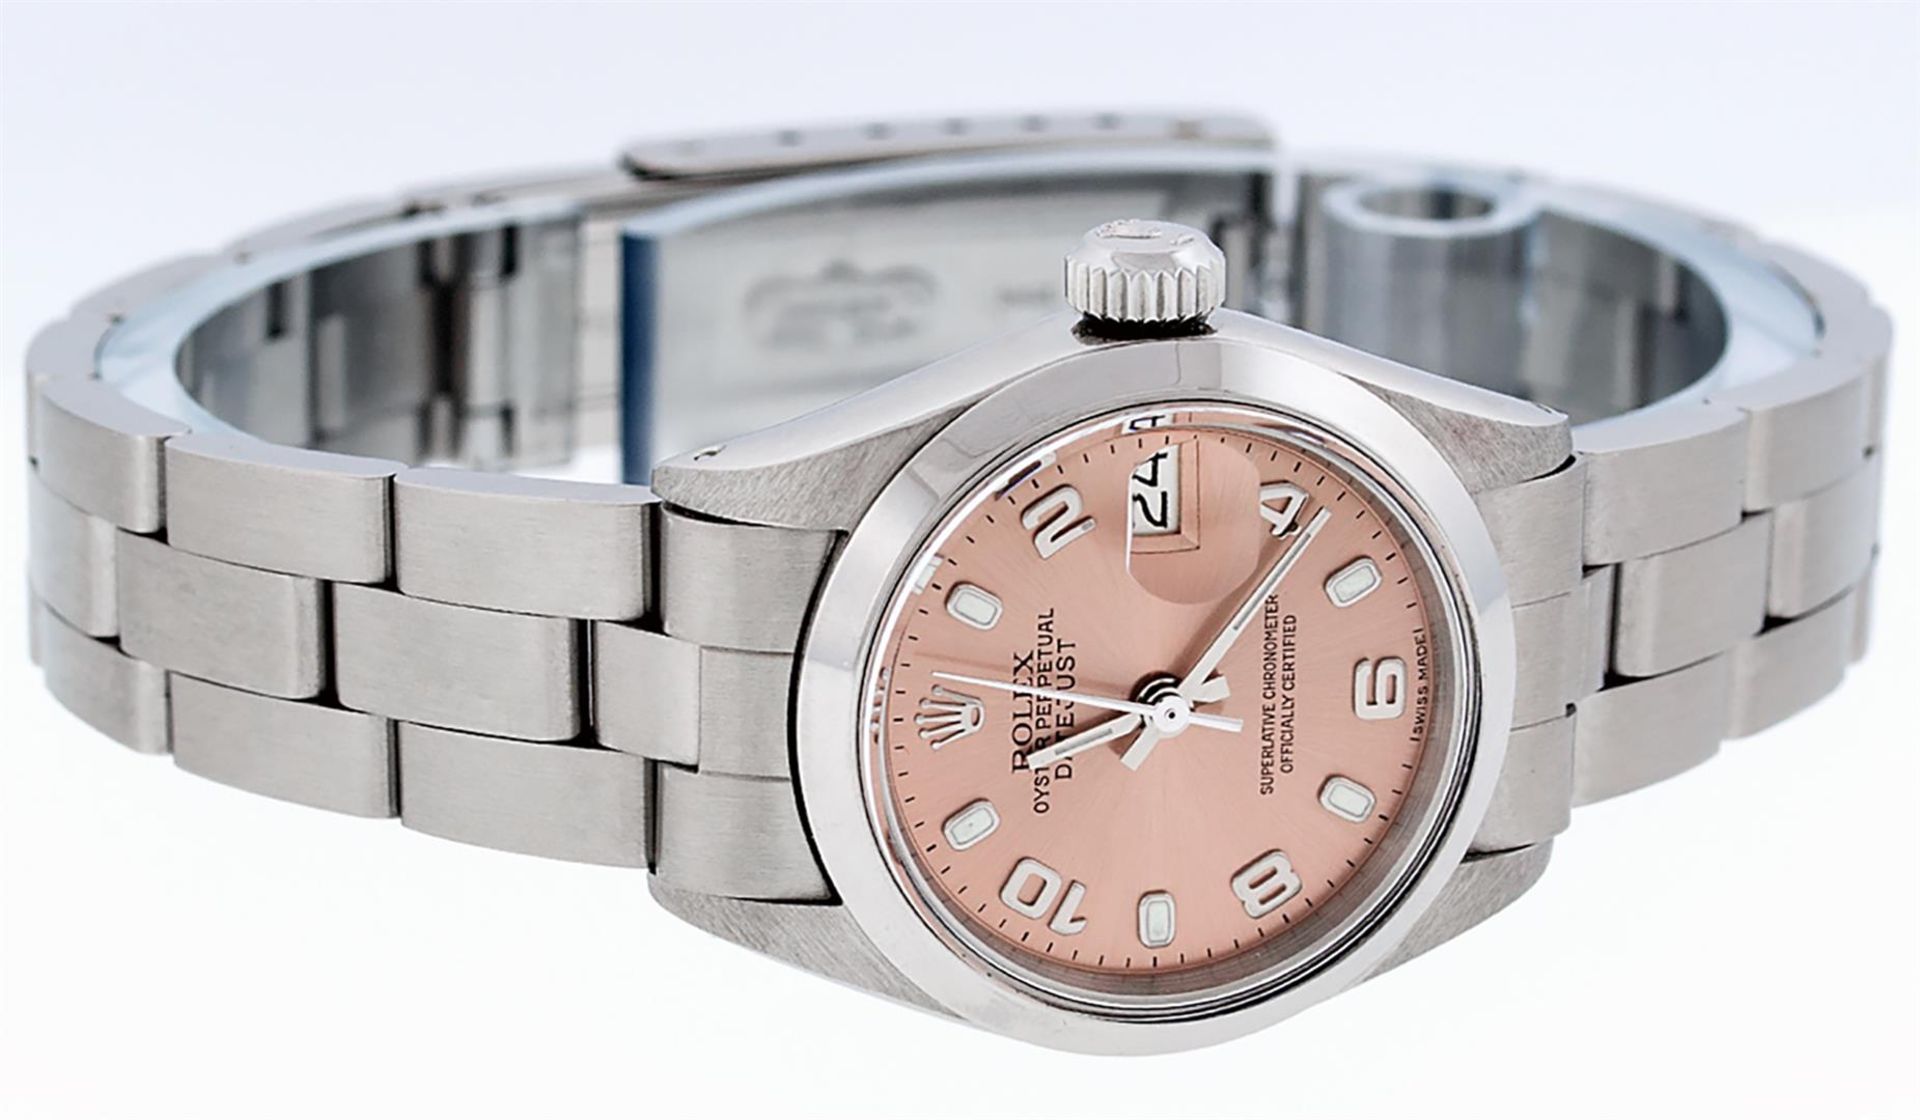 Rolex Ladies Stainless Steel Salmon Dial 26MM Oyster Band Datejust Wristwatch - Image 3 of 9